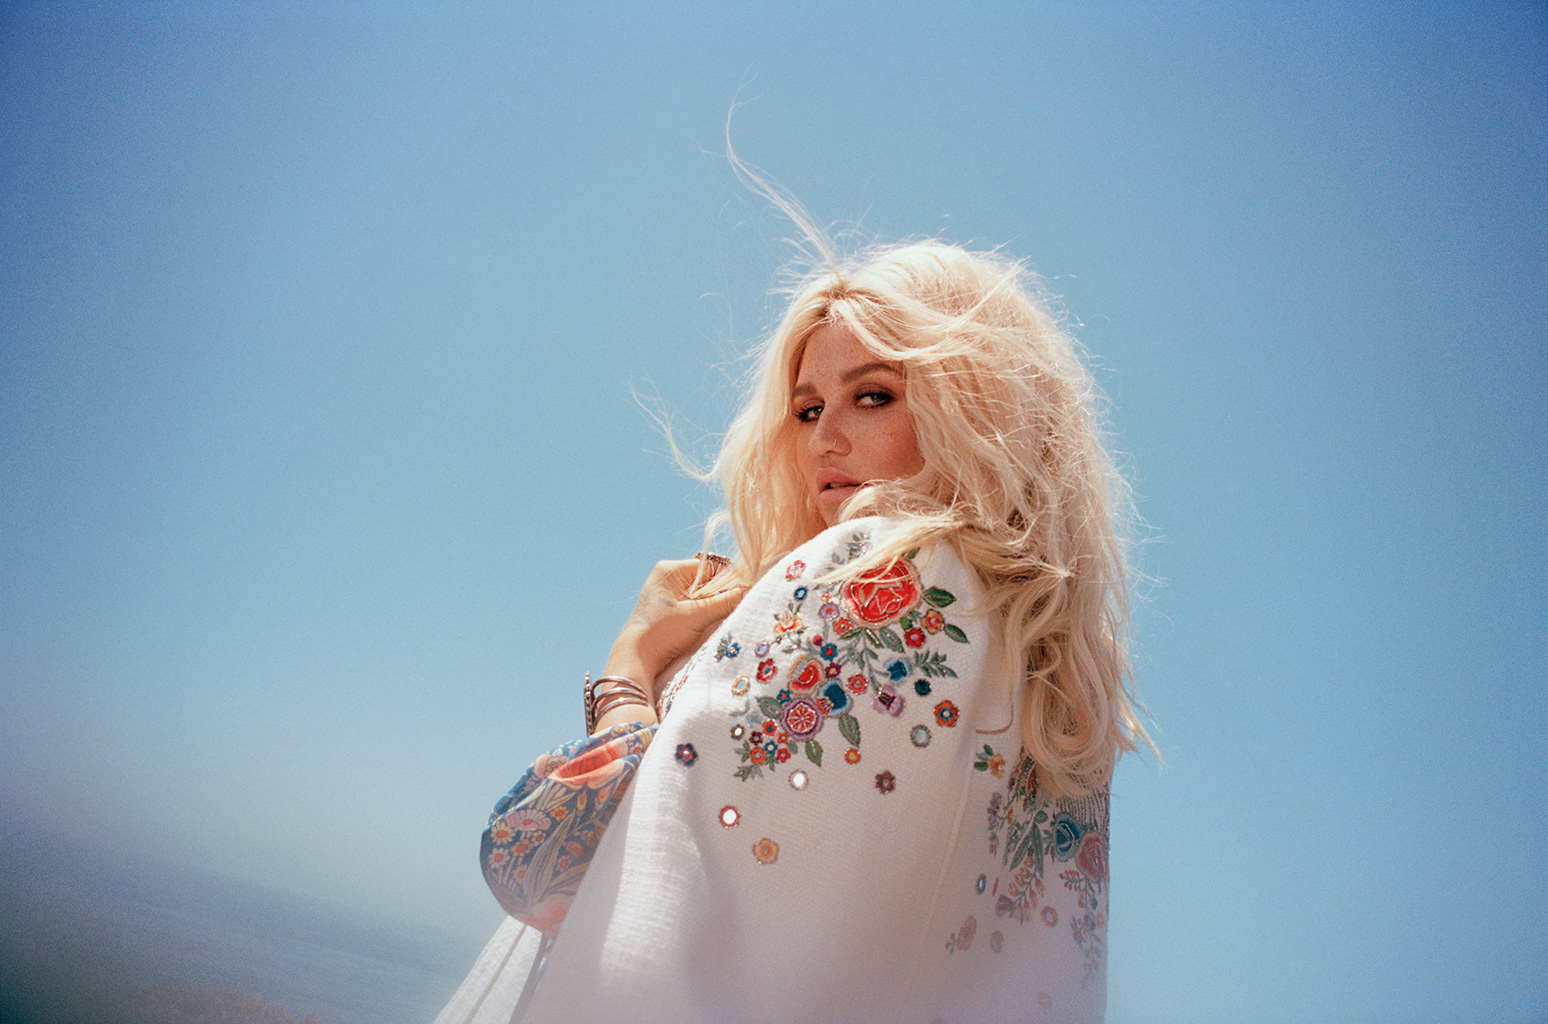 Kesha released new song “My Own Dance” and accompanying video